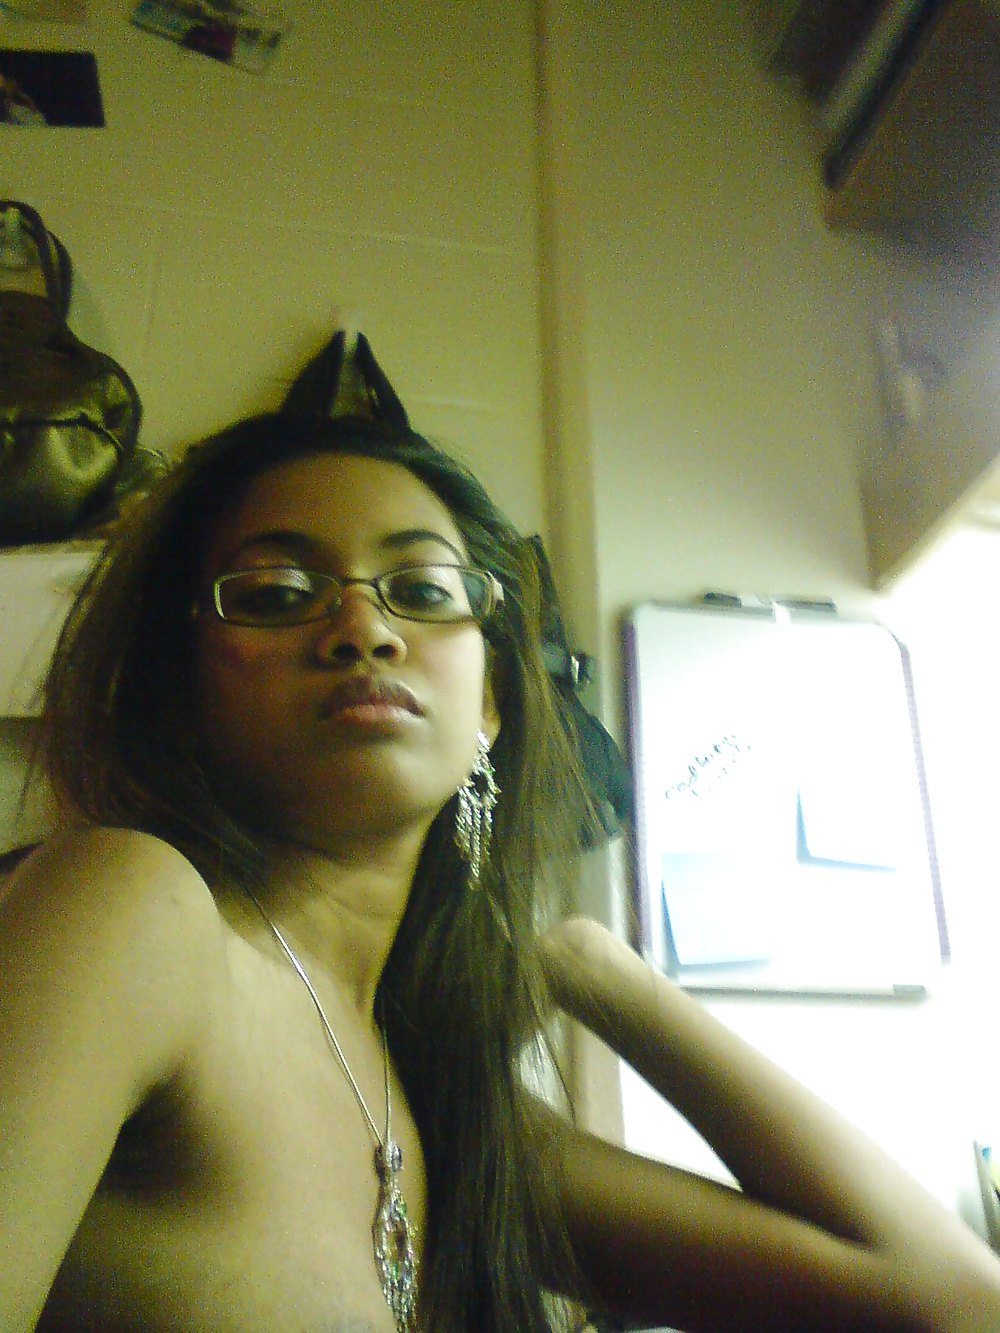 Sexy Black Chick With Glasses #12969687